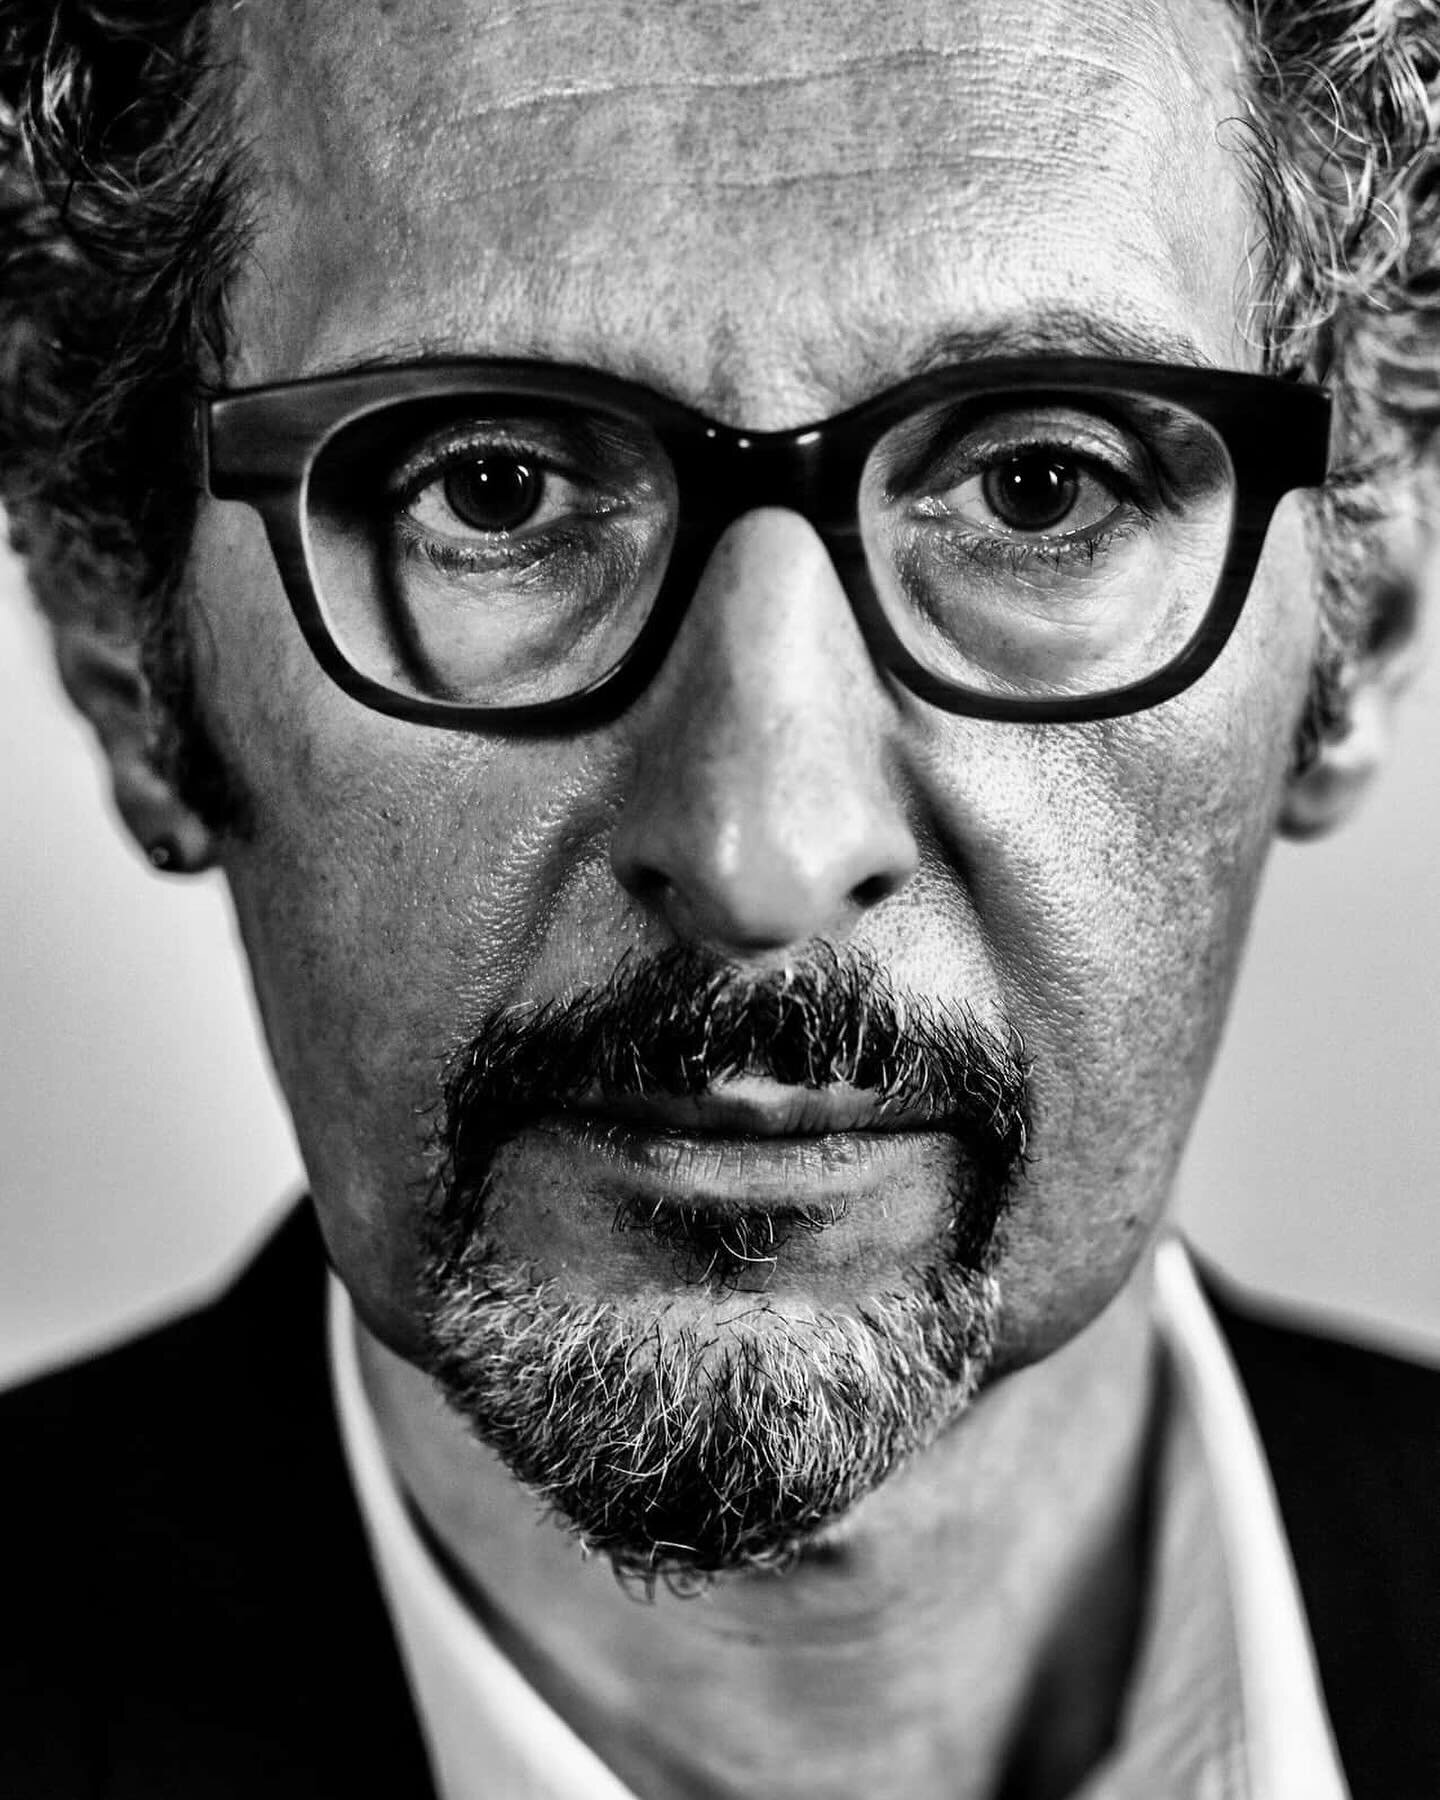 John Michael Turturro (born February 28, 1957) is an American actor and filmmaker. He is known for his varied complex roles in independent films. He has appeared in over sixty feature films and has worked frequently with the Coen brothers, Adam Sandl